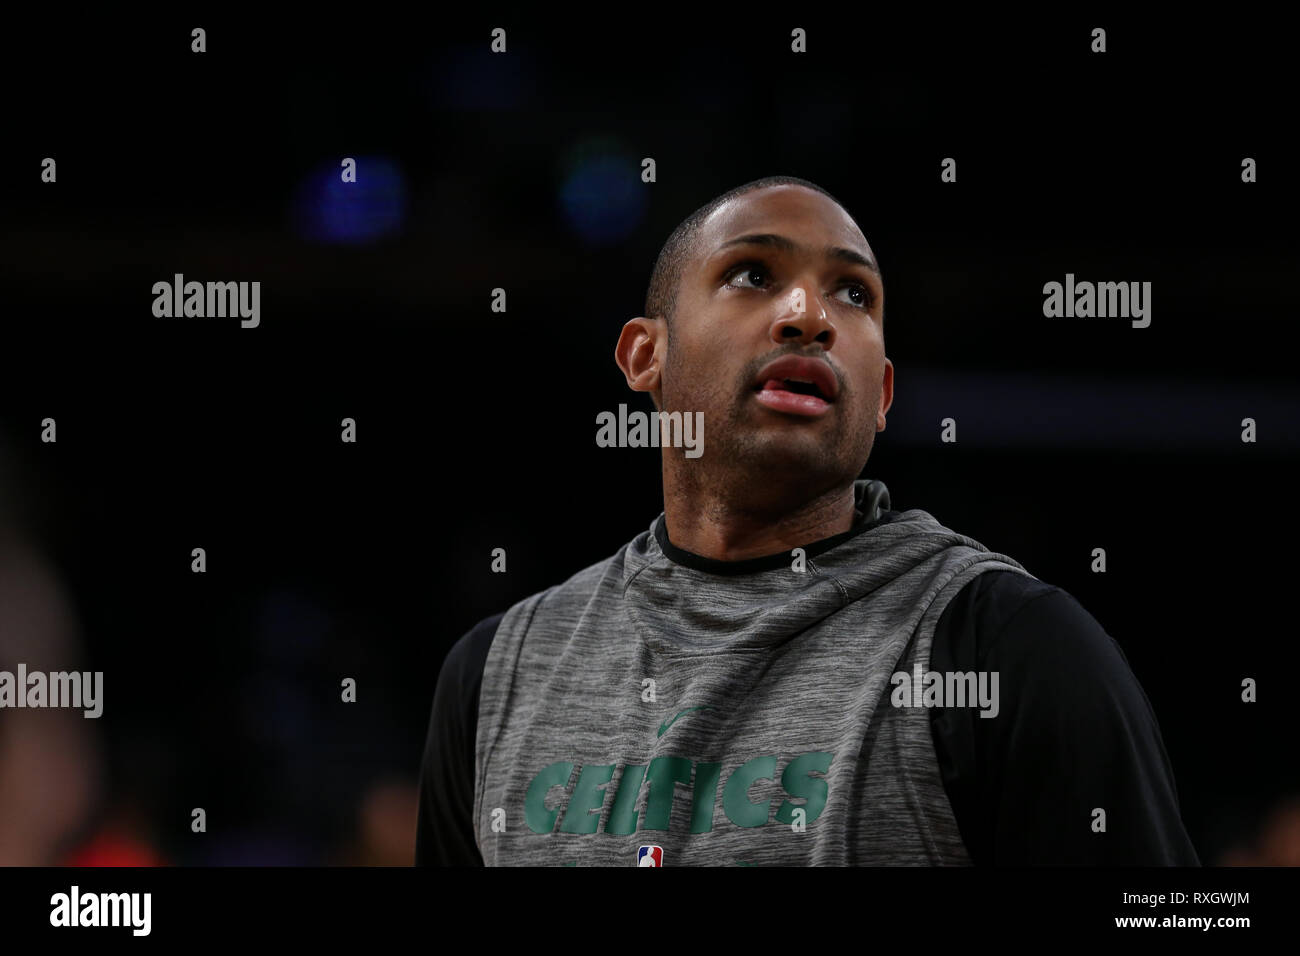 Boston Celtics center Al Horford #42 during the Boston Celtics vs Los Angeles Lakers game at Staples Center in Los Angeles, CA on March 09, 2019. (Photo by Jevone Moore) Stock Photo